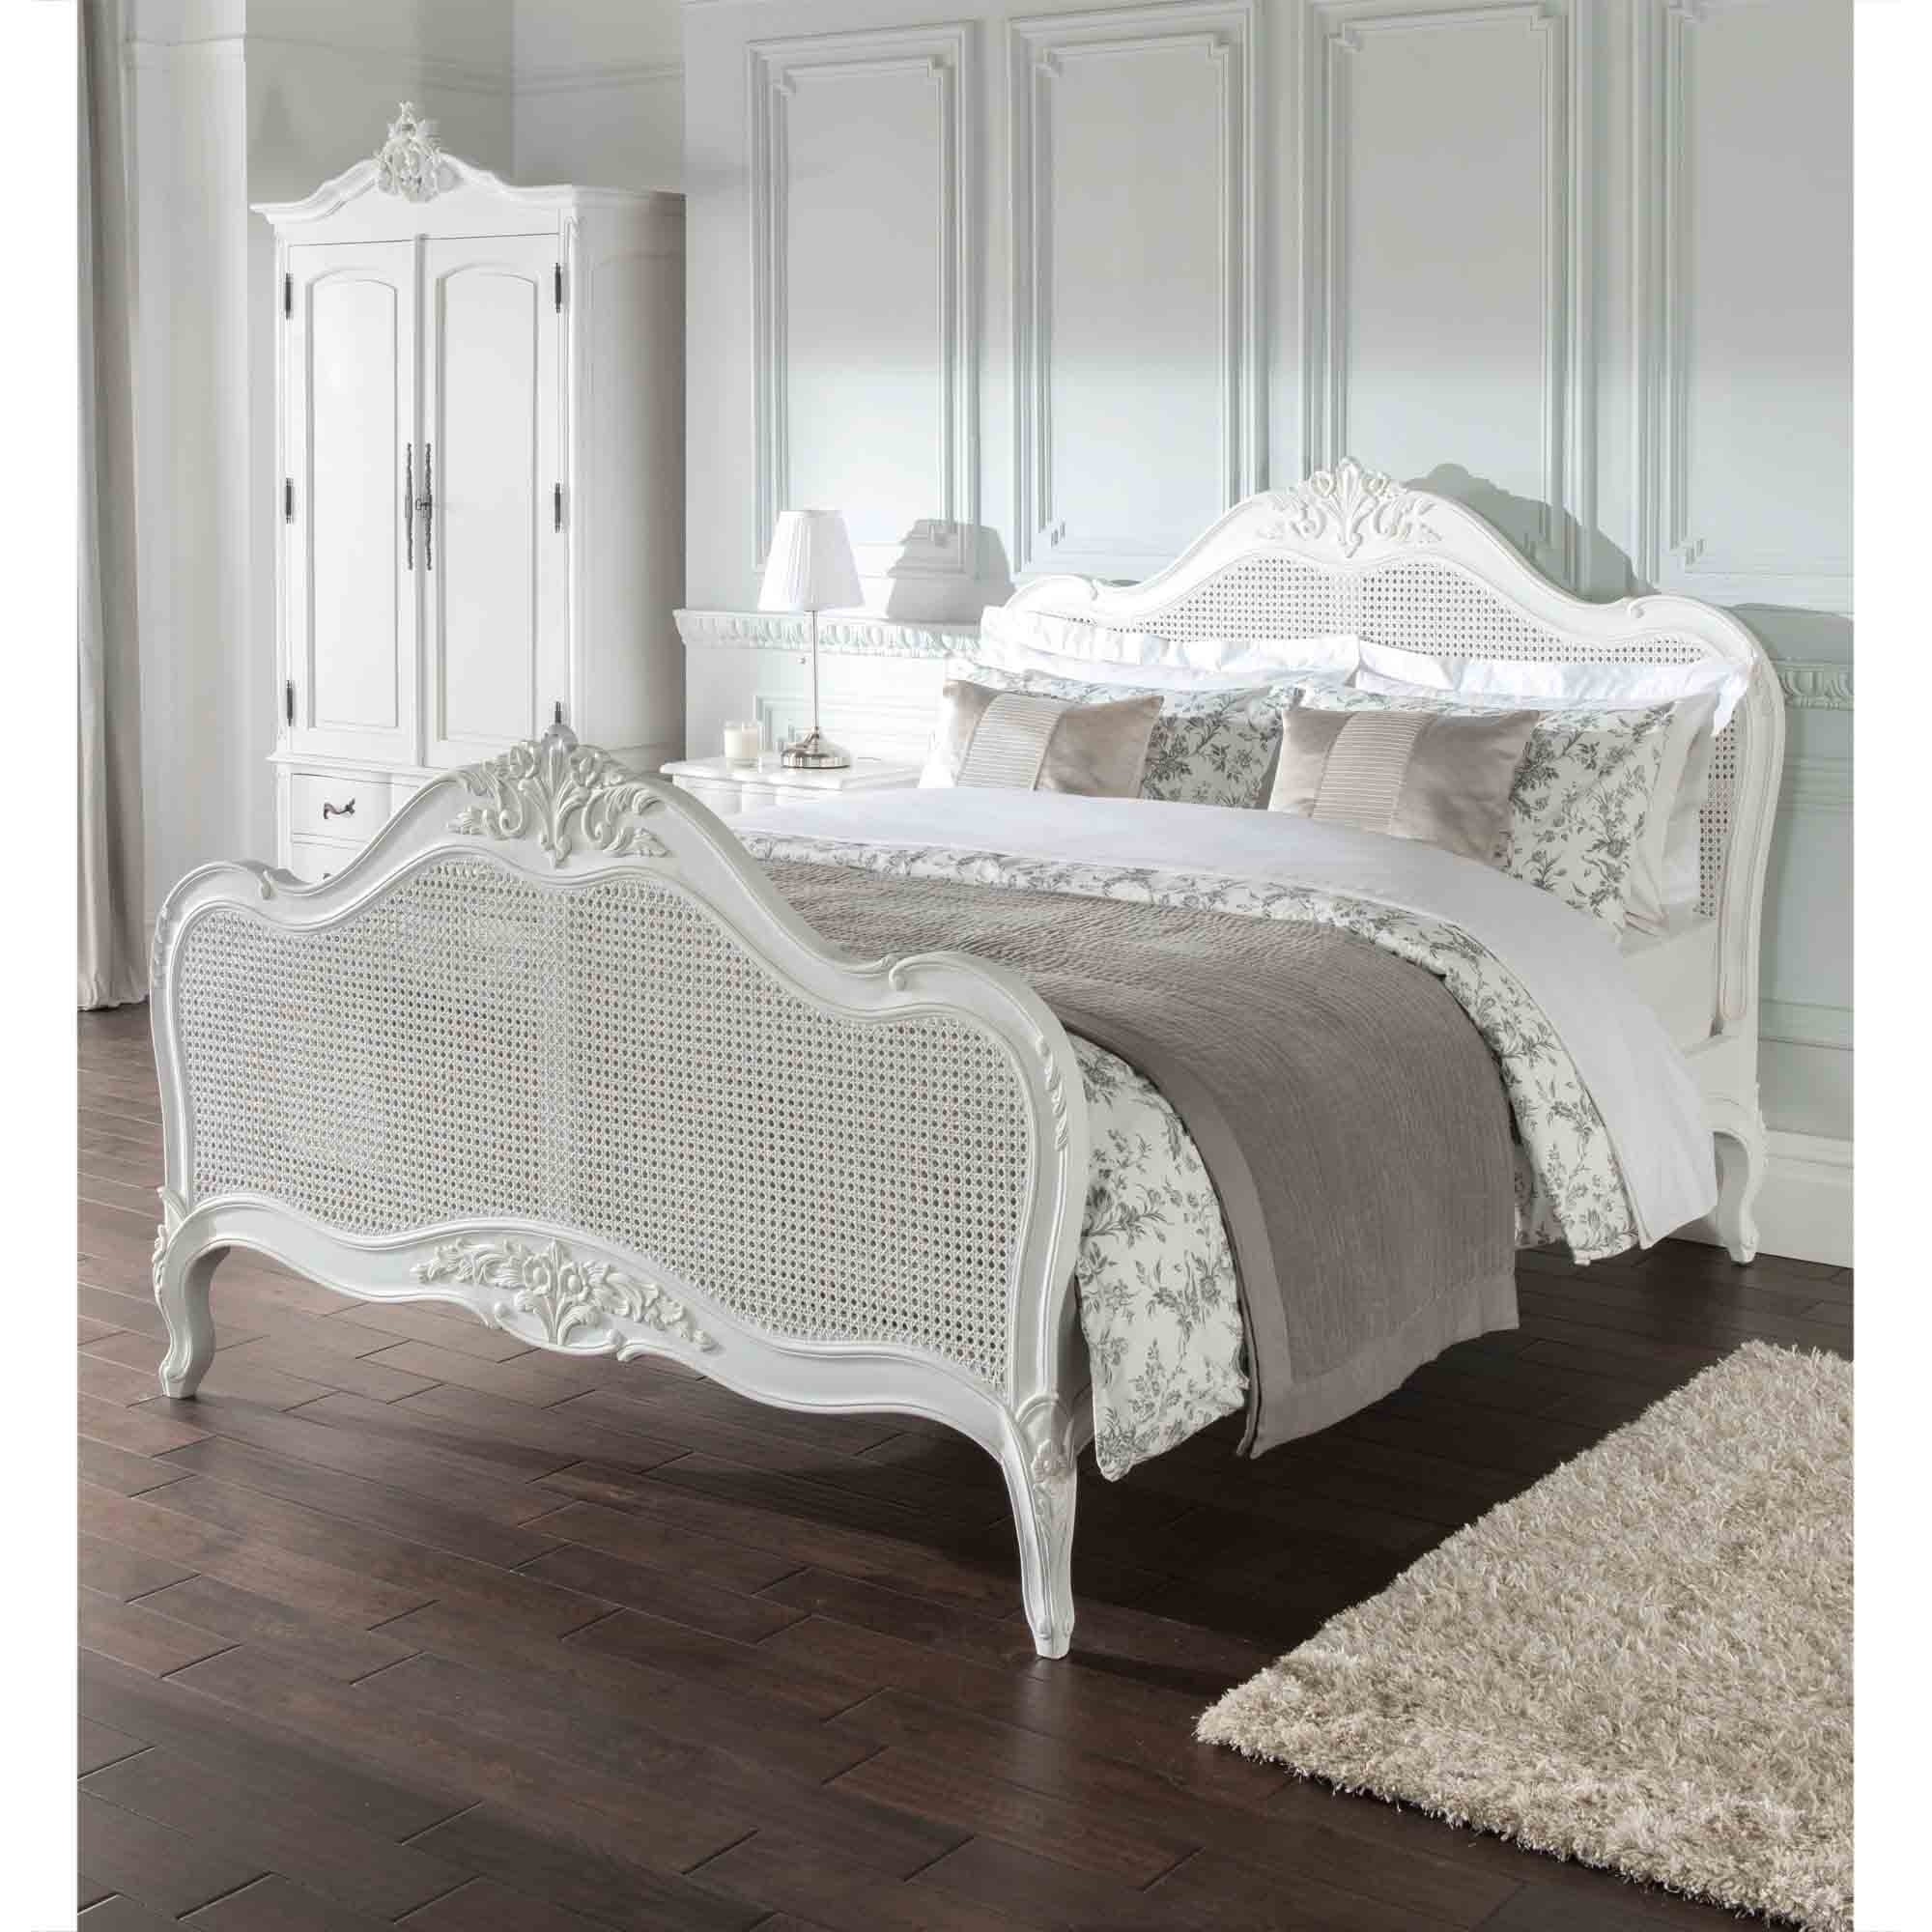 Antique french style bed shabby chic bedroom furniture 1